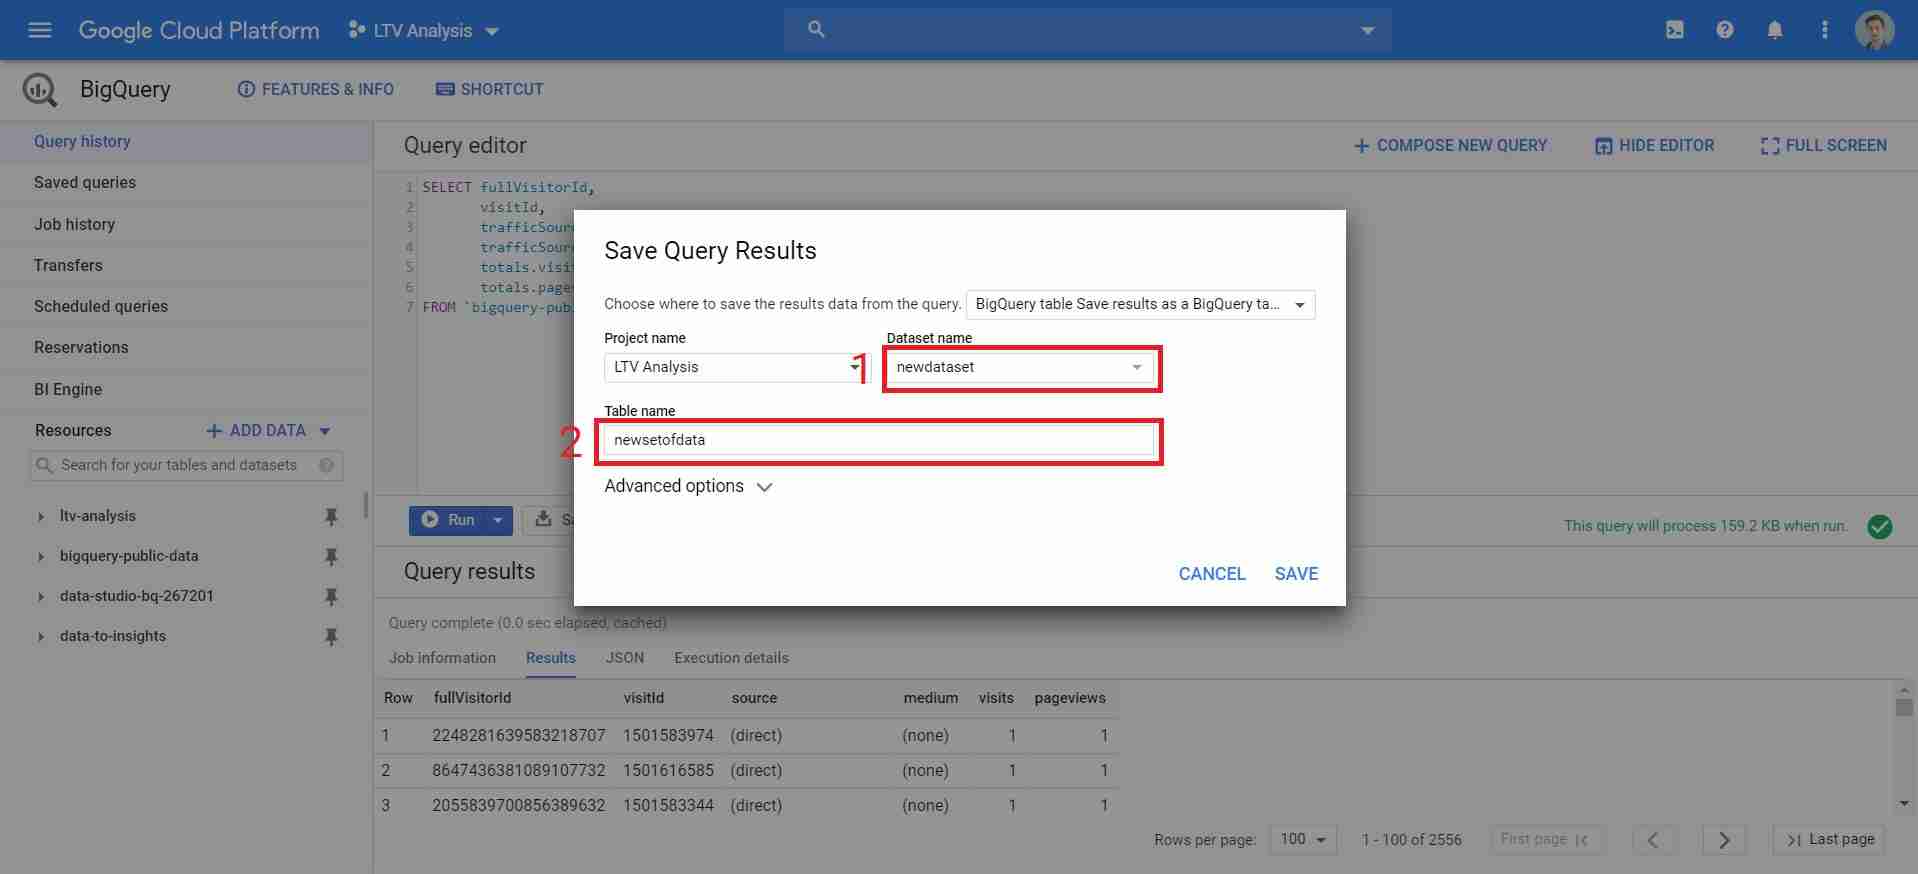 save query results popup screen in bigquery